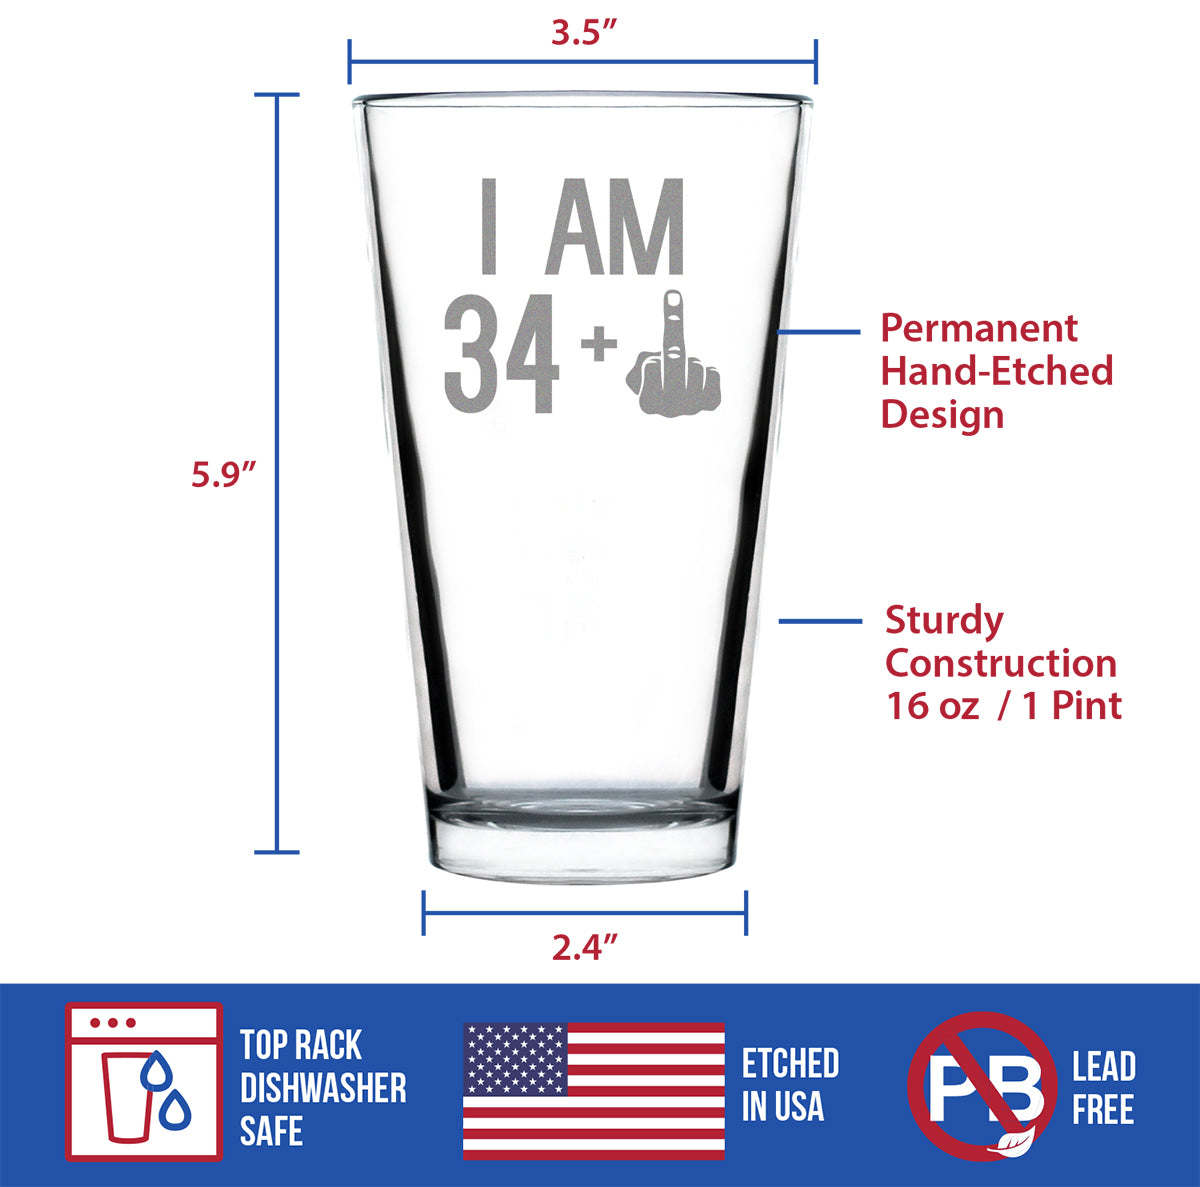 34 + 1 Middle Finger - 16 oz Pint Glass for Beer - Funny 35th Birthday Gifts for Men and Women Turning 35